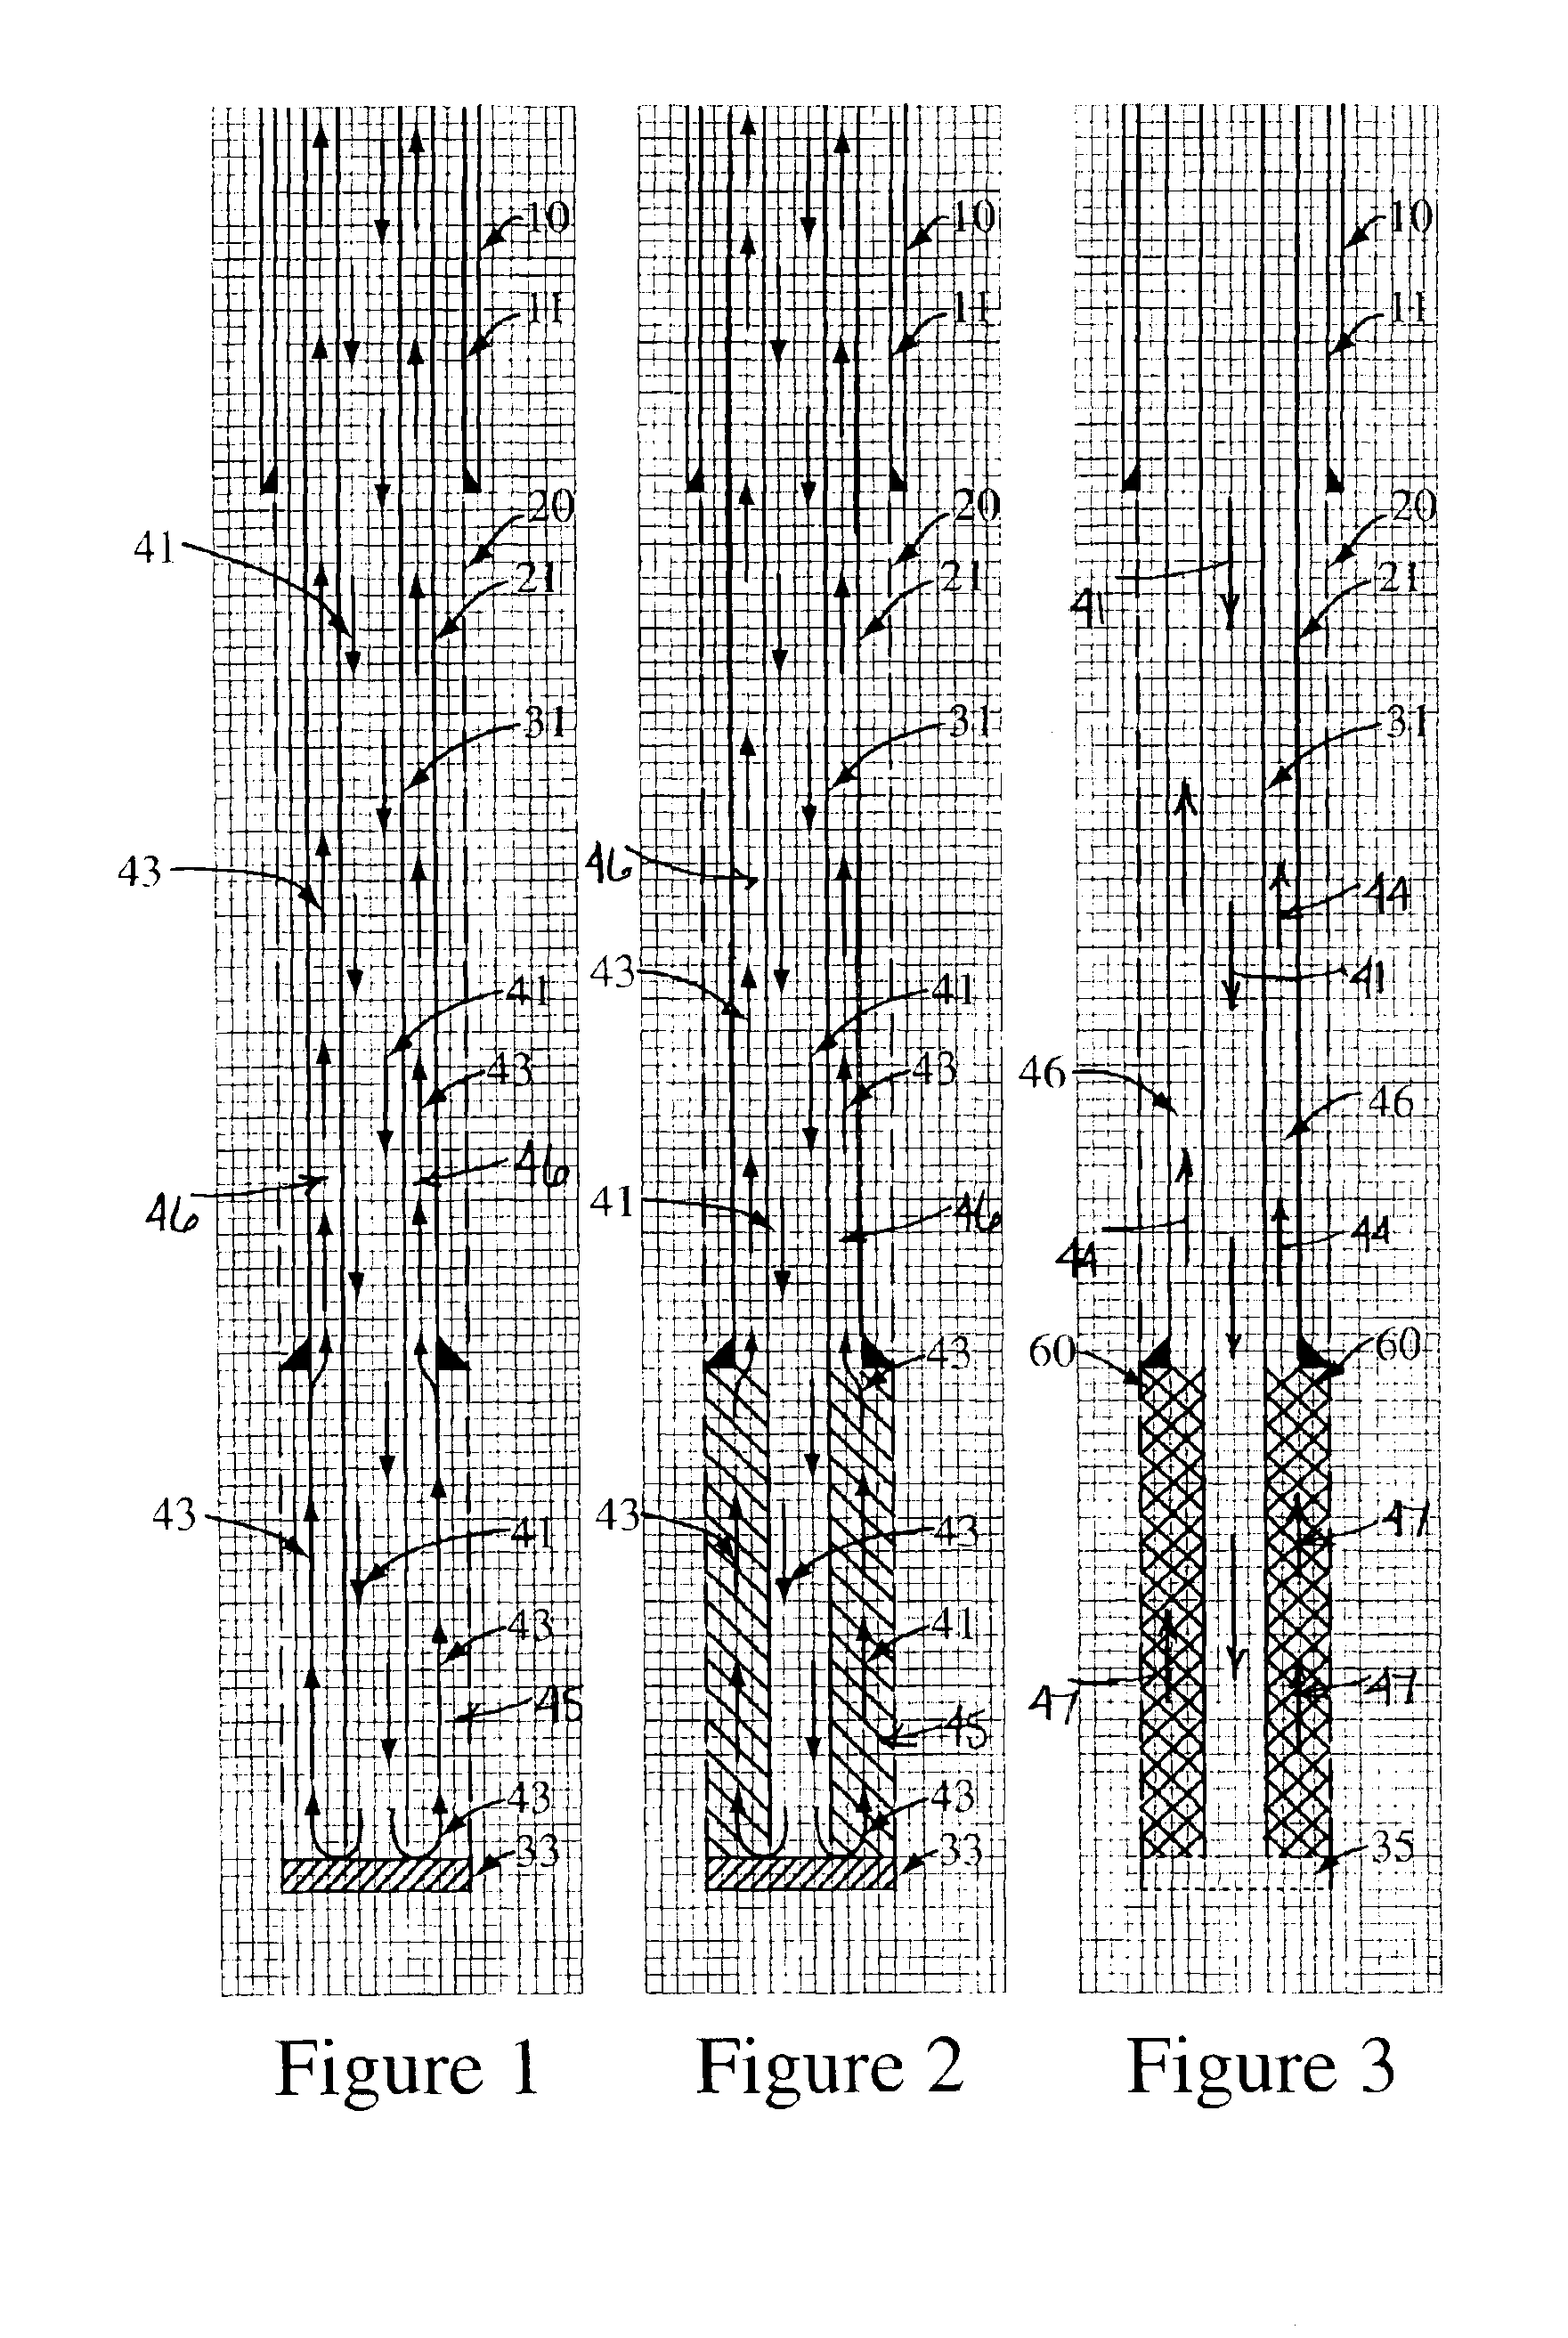 Method for upward growth of a hydraulic fracture along a well bore sandpacked annulus